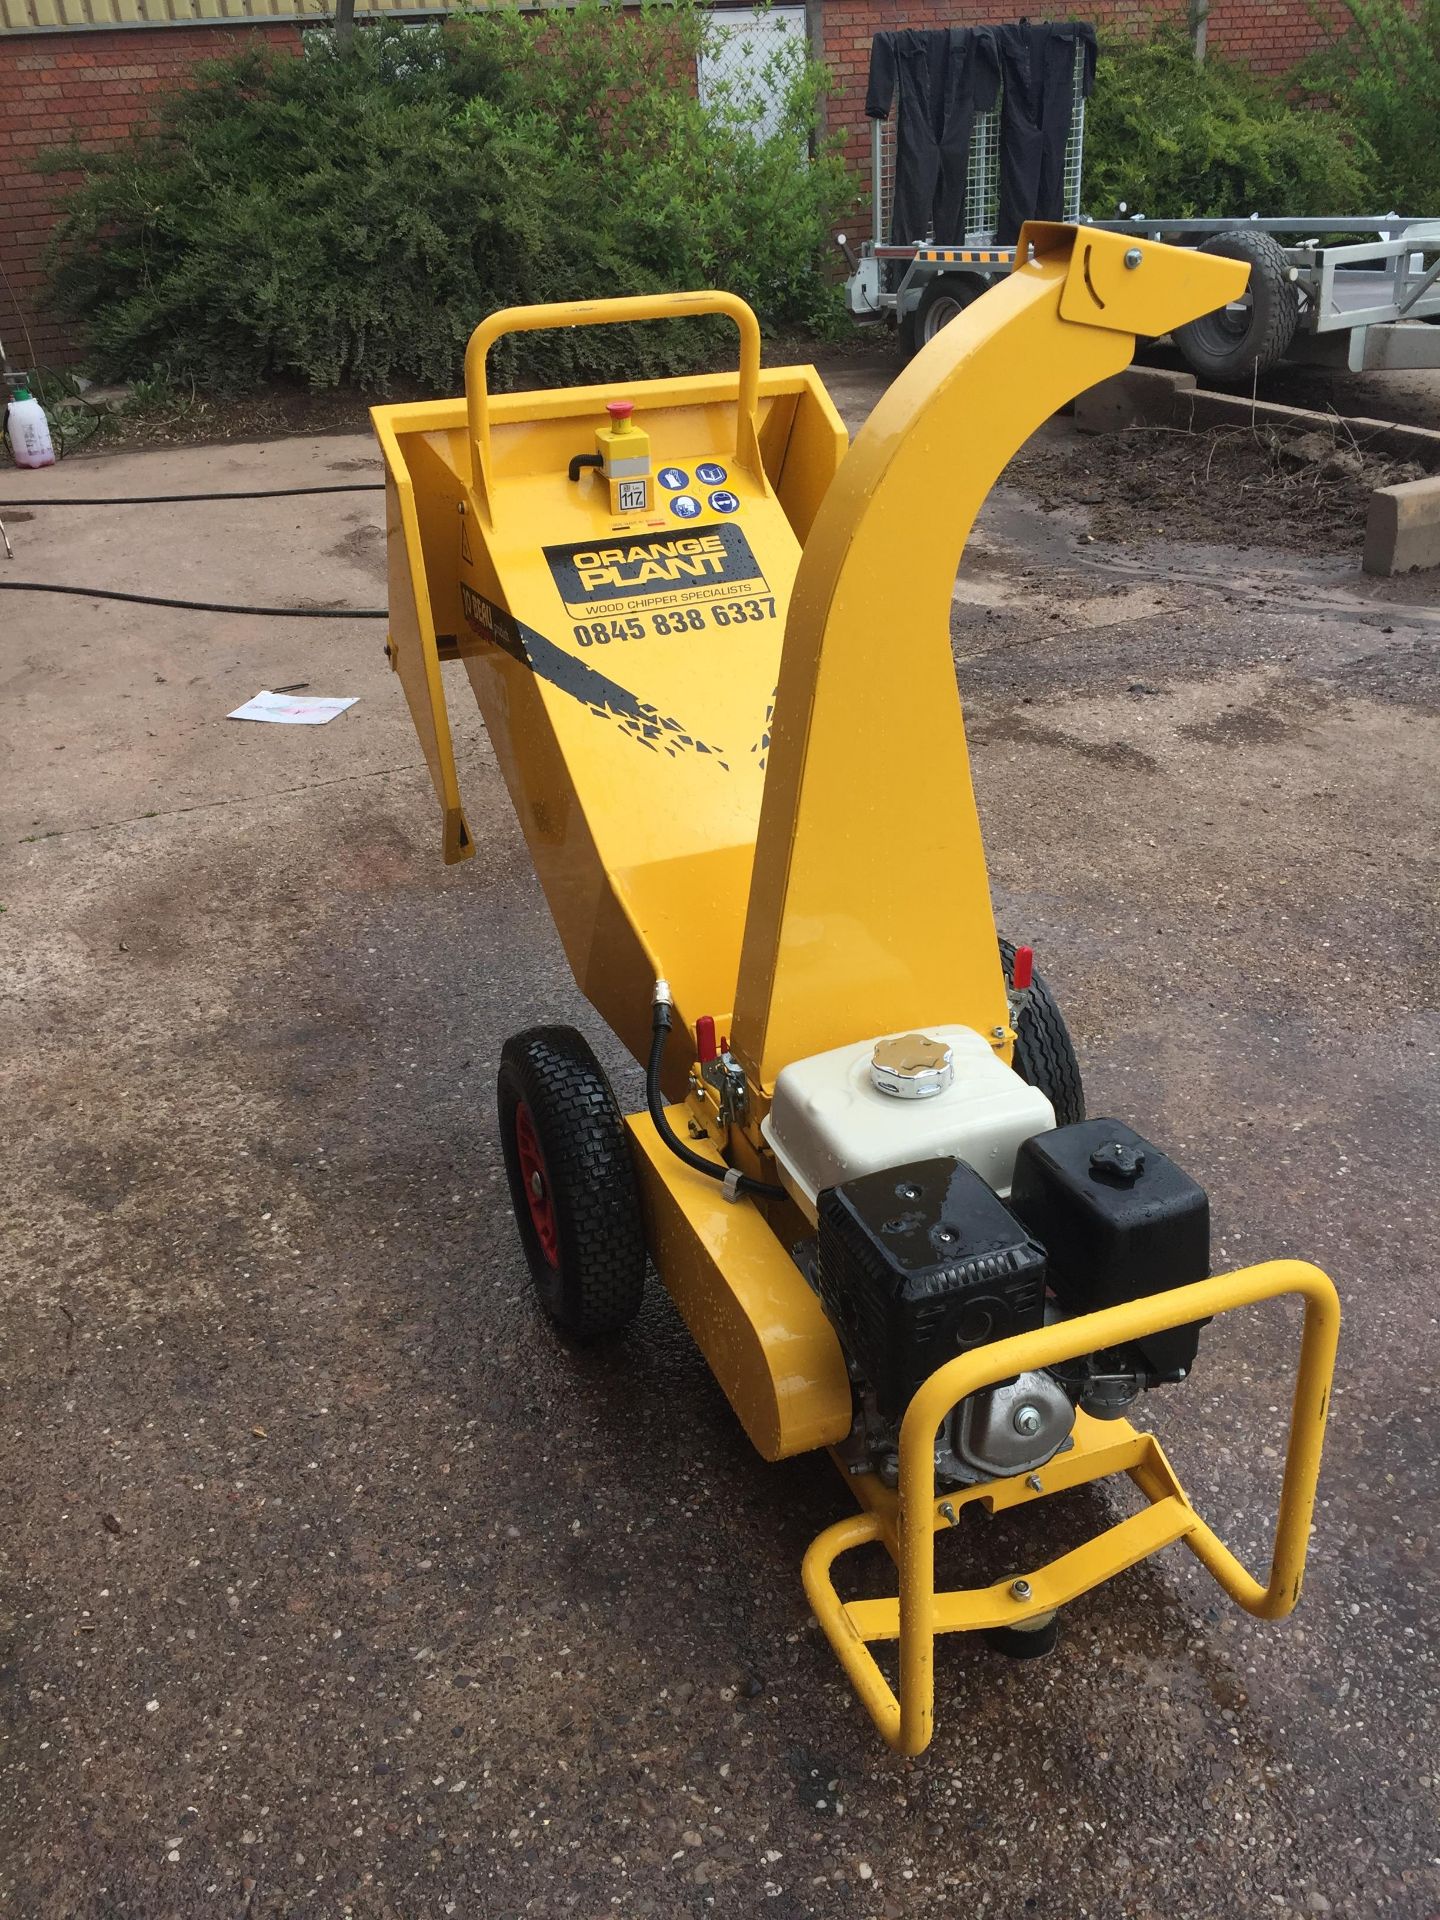 Jo Beau M300 3in Portable Chipper, indicated hours